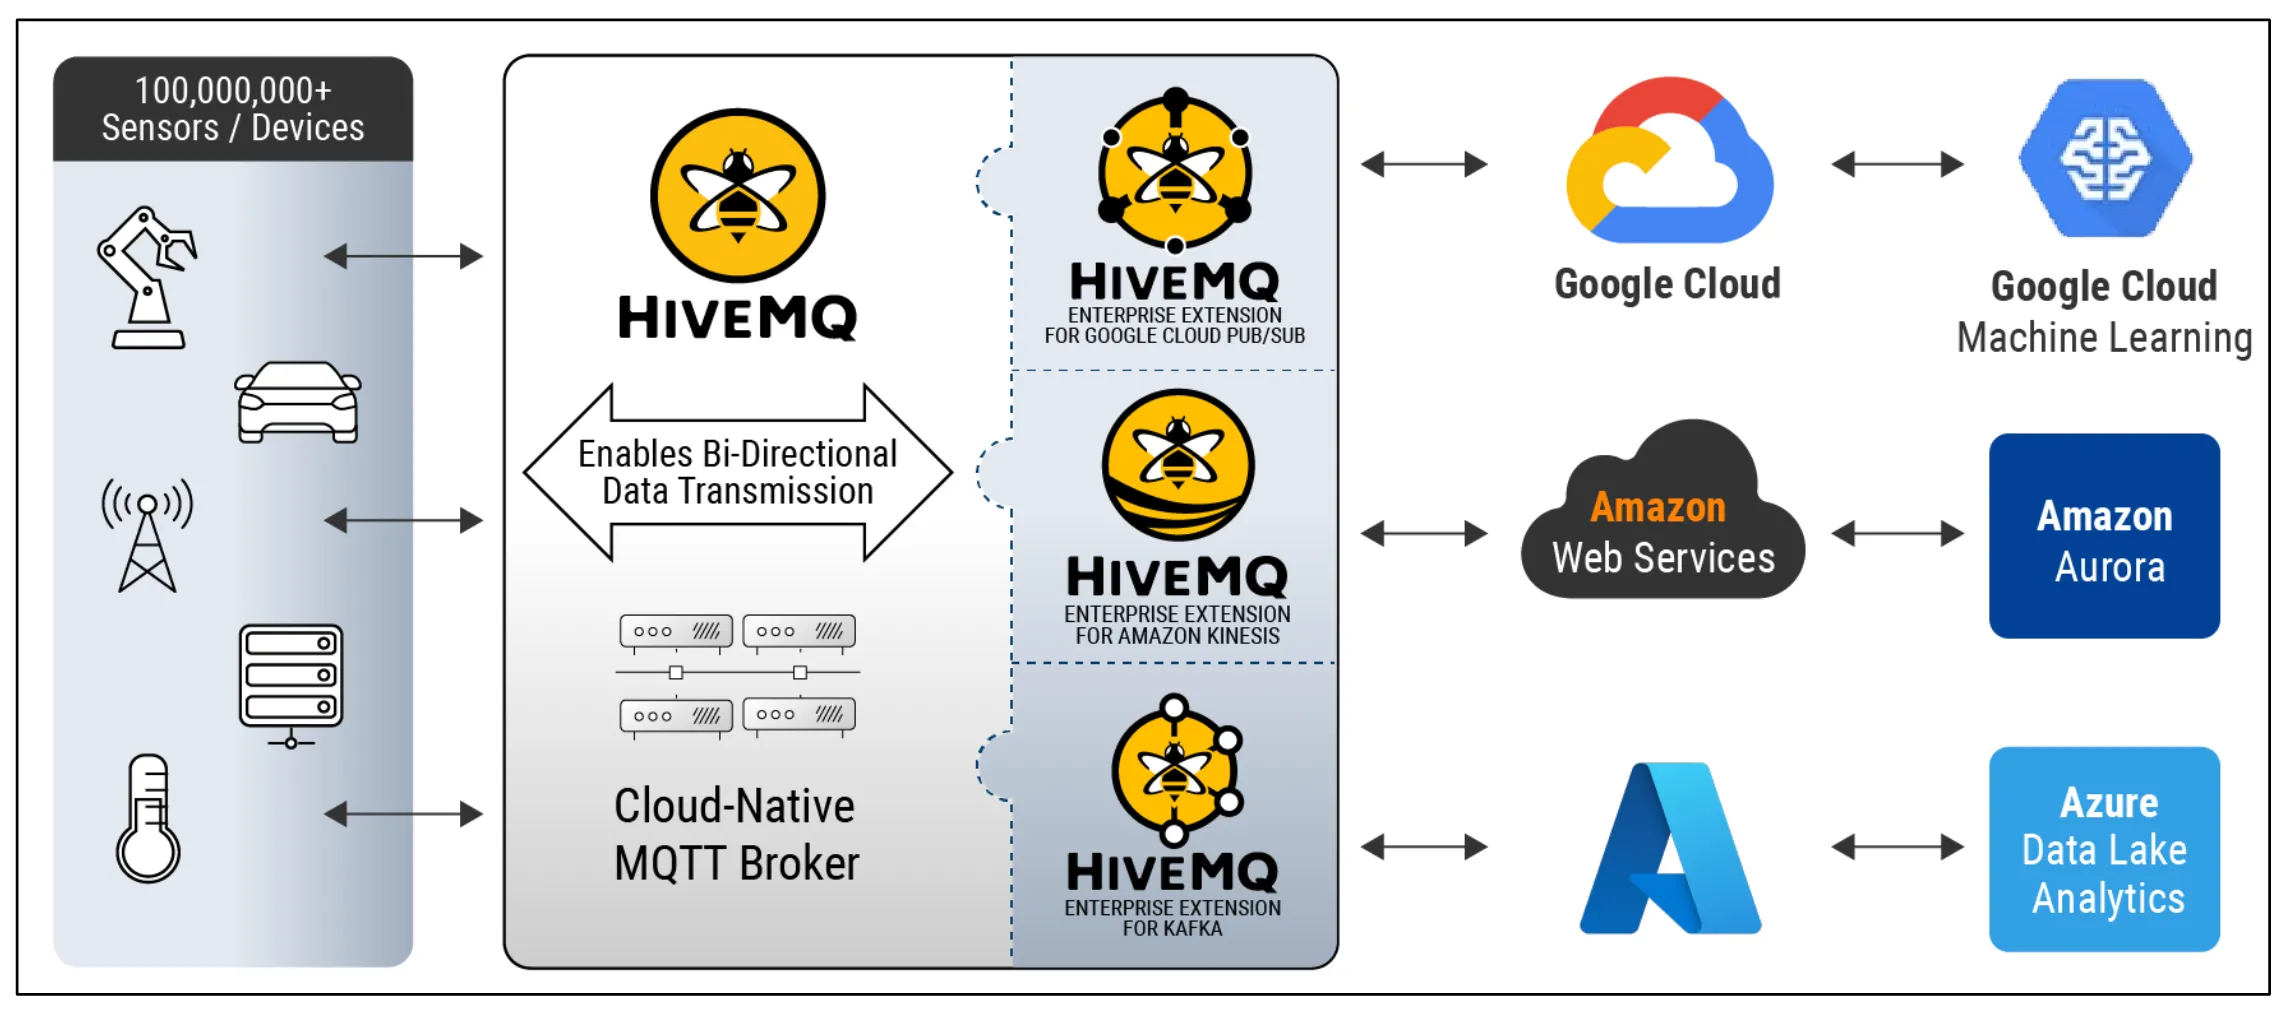 HiveMQ’s highly flexible platform ensures your organization remains flexible, avoid vendor lock-in, and take advantage of the best services offered by each cloud provider.